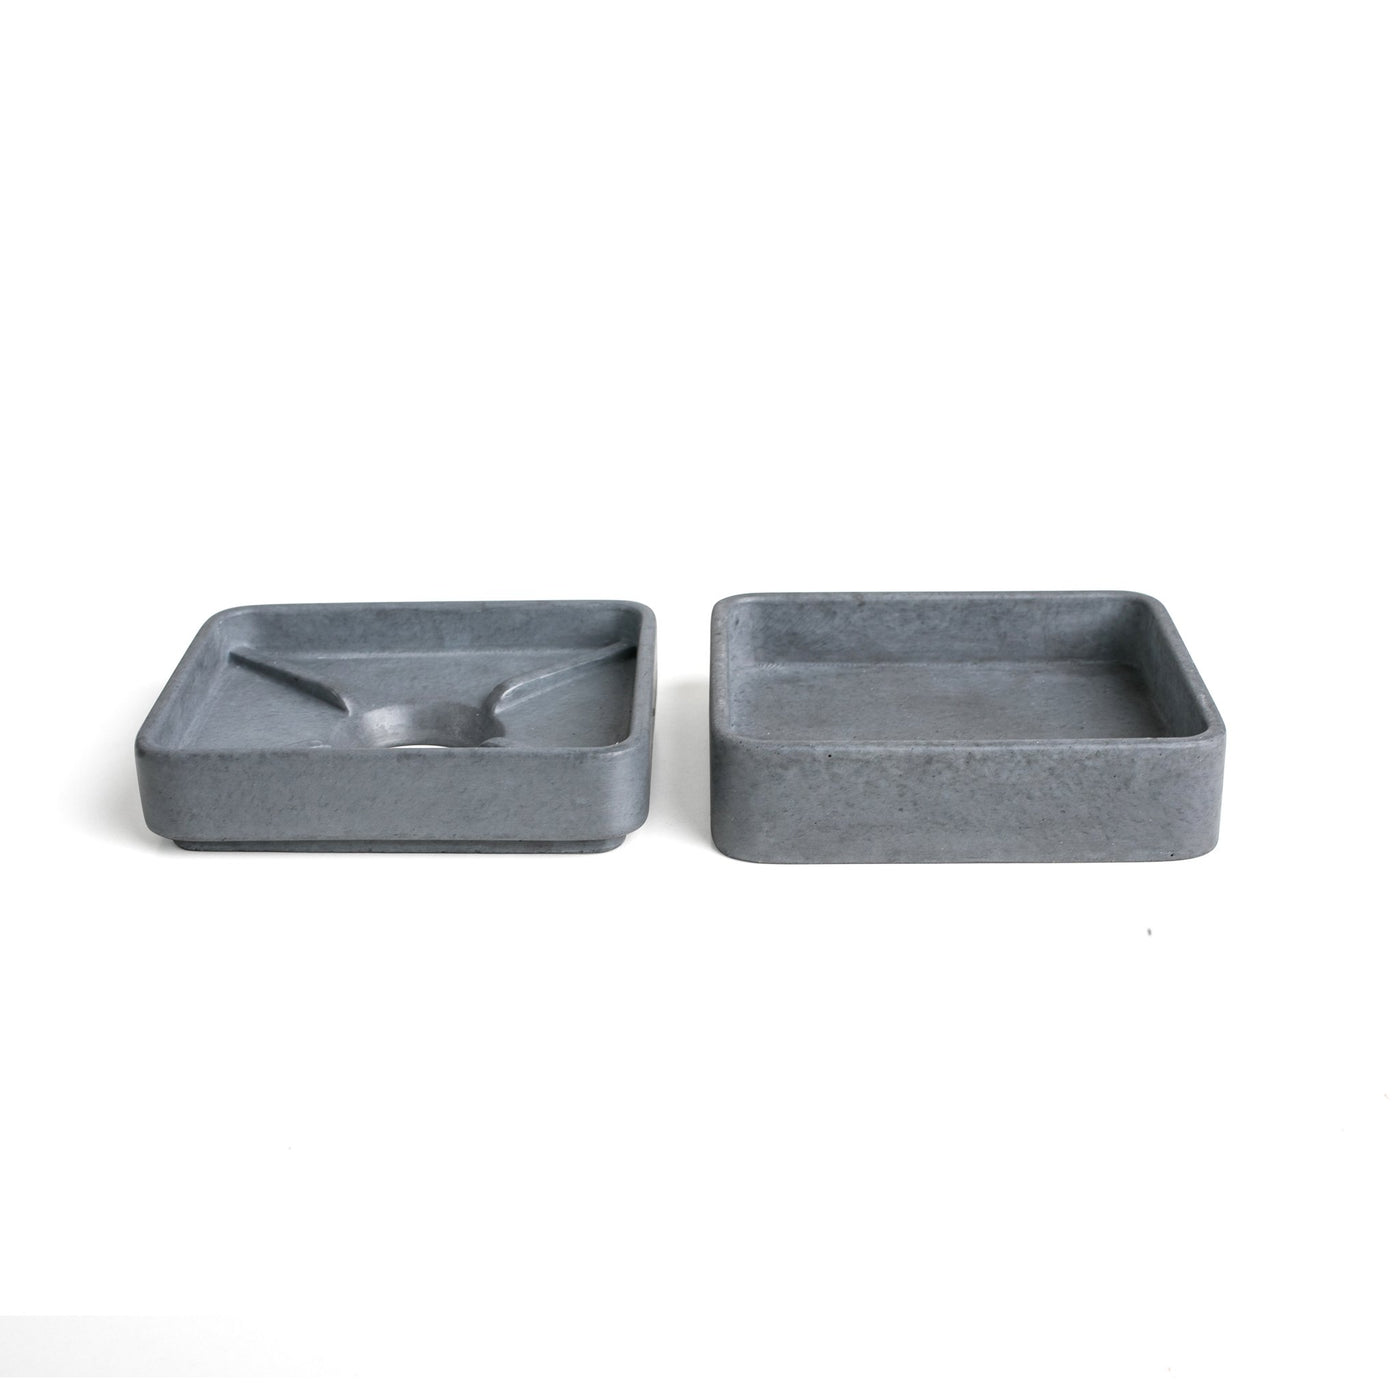 Light Grey Concrete Soap Stand w/ Vegan Soap-Storing and Organising-BOXES / ORGANISERS / CONTAINERS, CONCRETE, SOAP STANDS-Forest Homes-Nature inspired decor-Nature decor